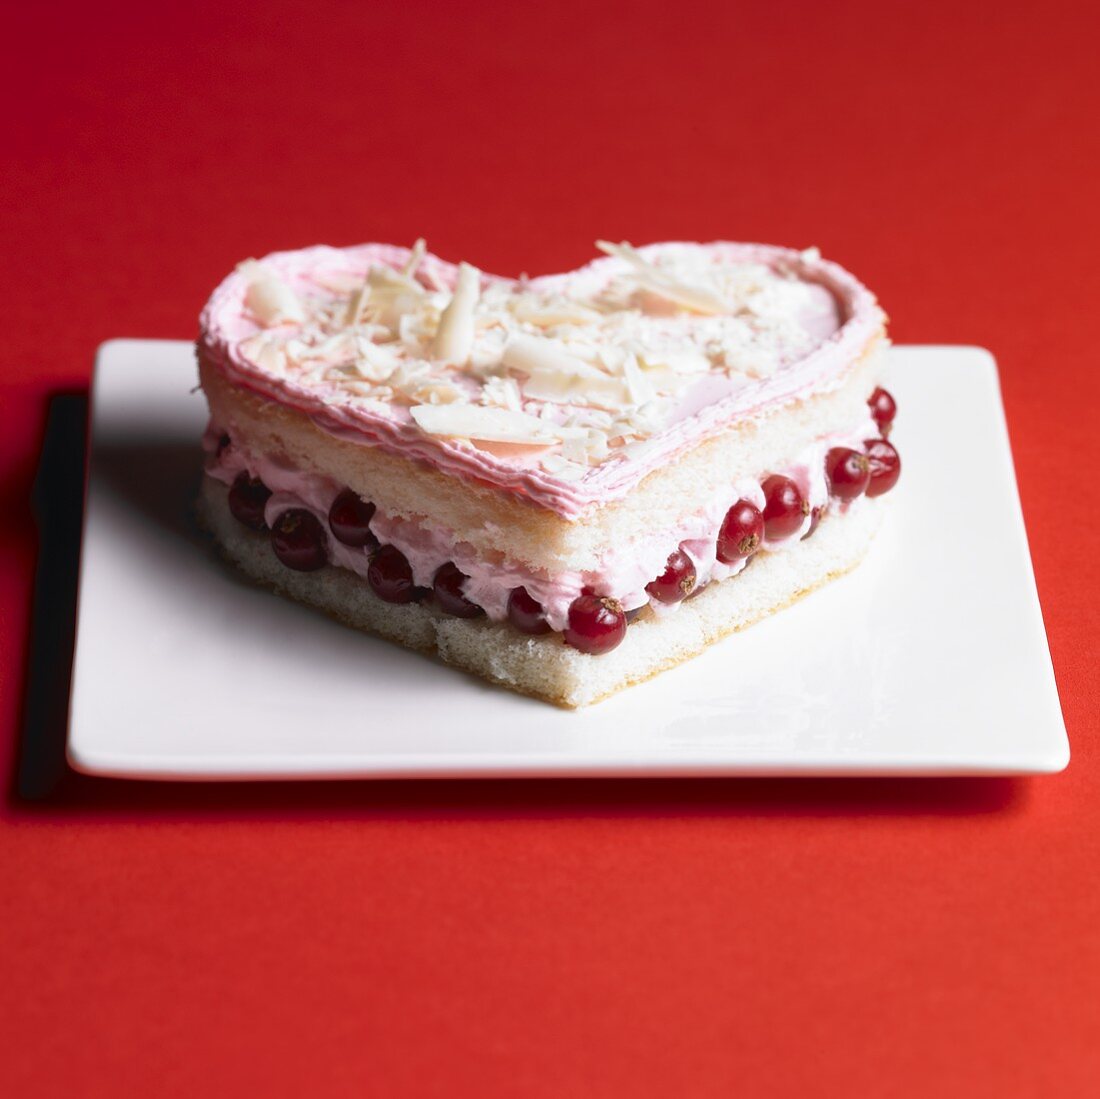 Heart-shaped sponge cake with redcurrants and cream